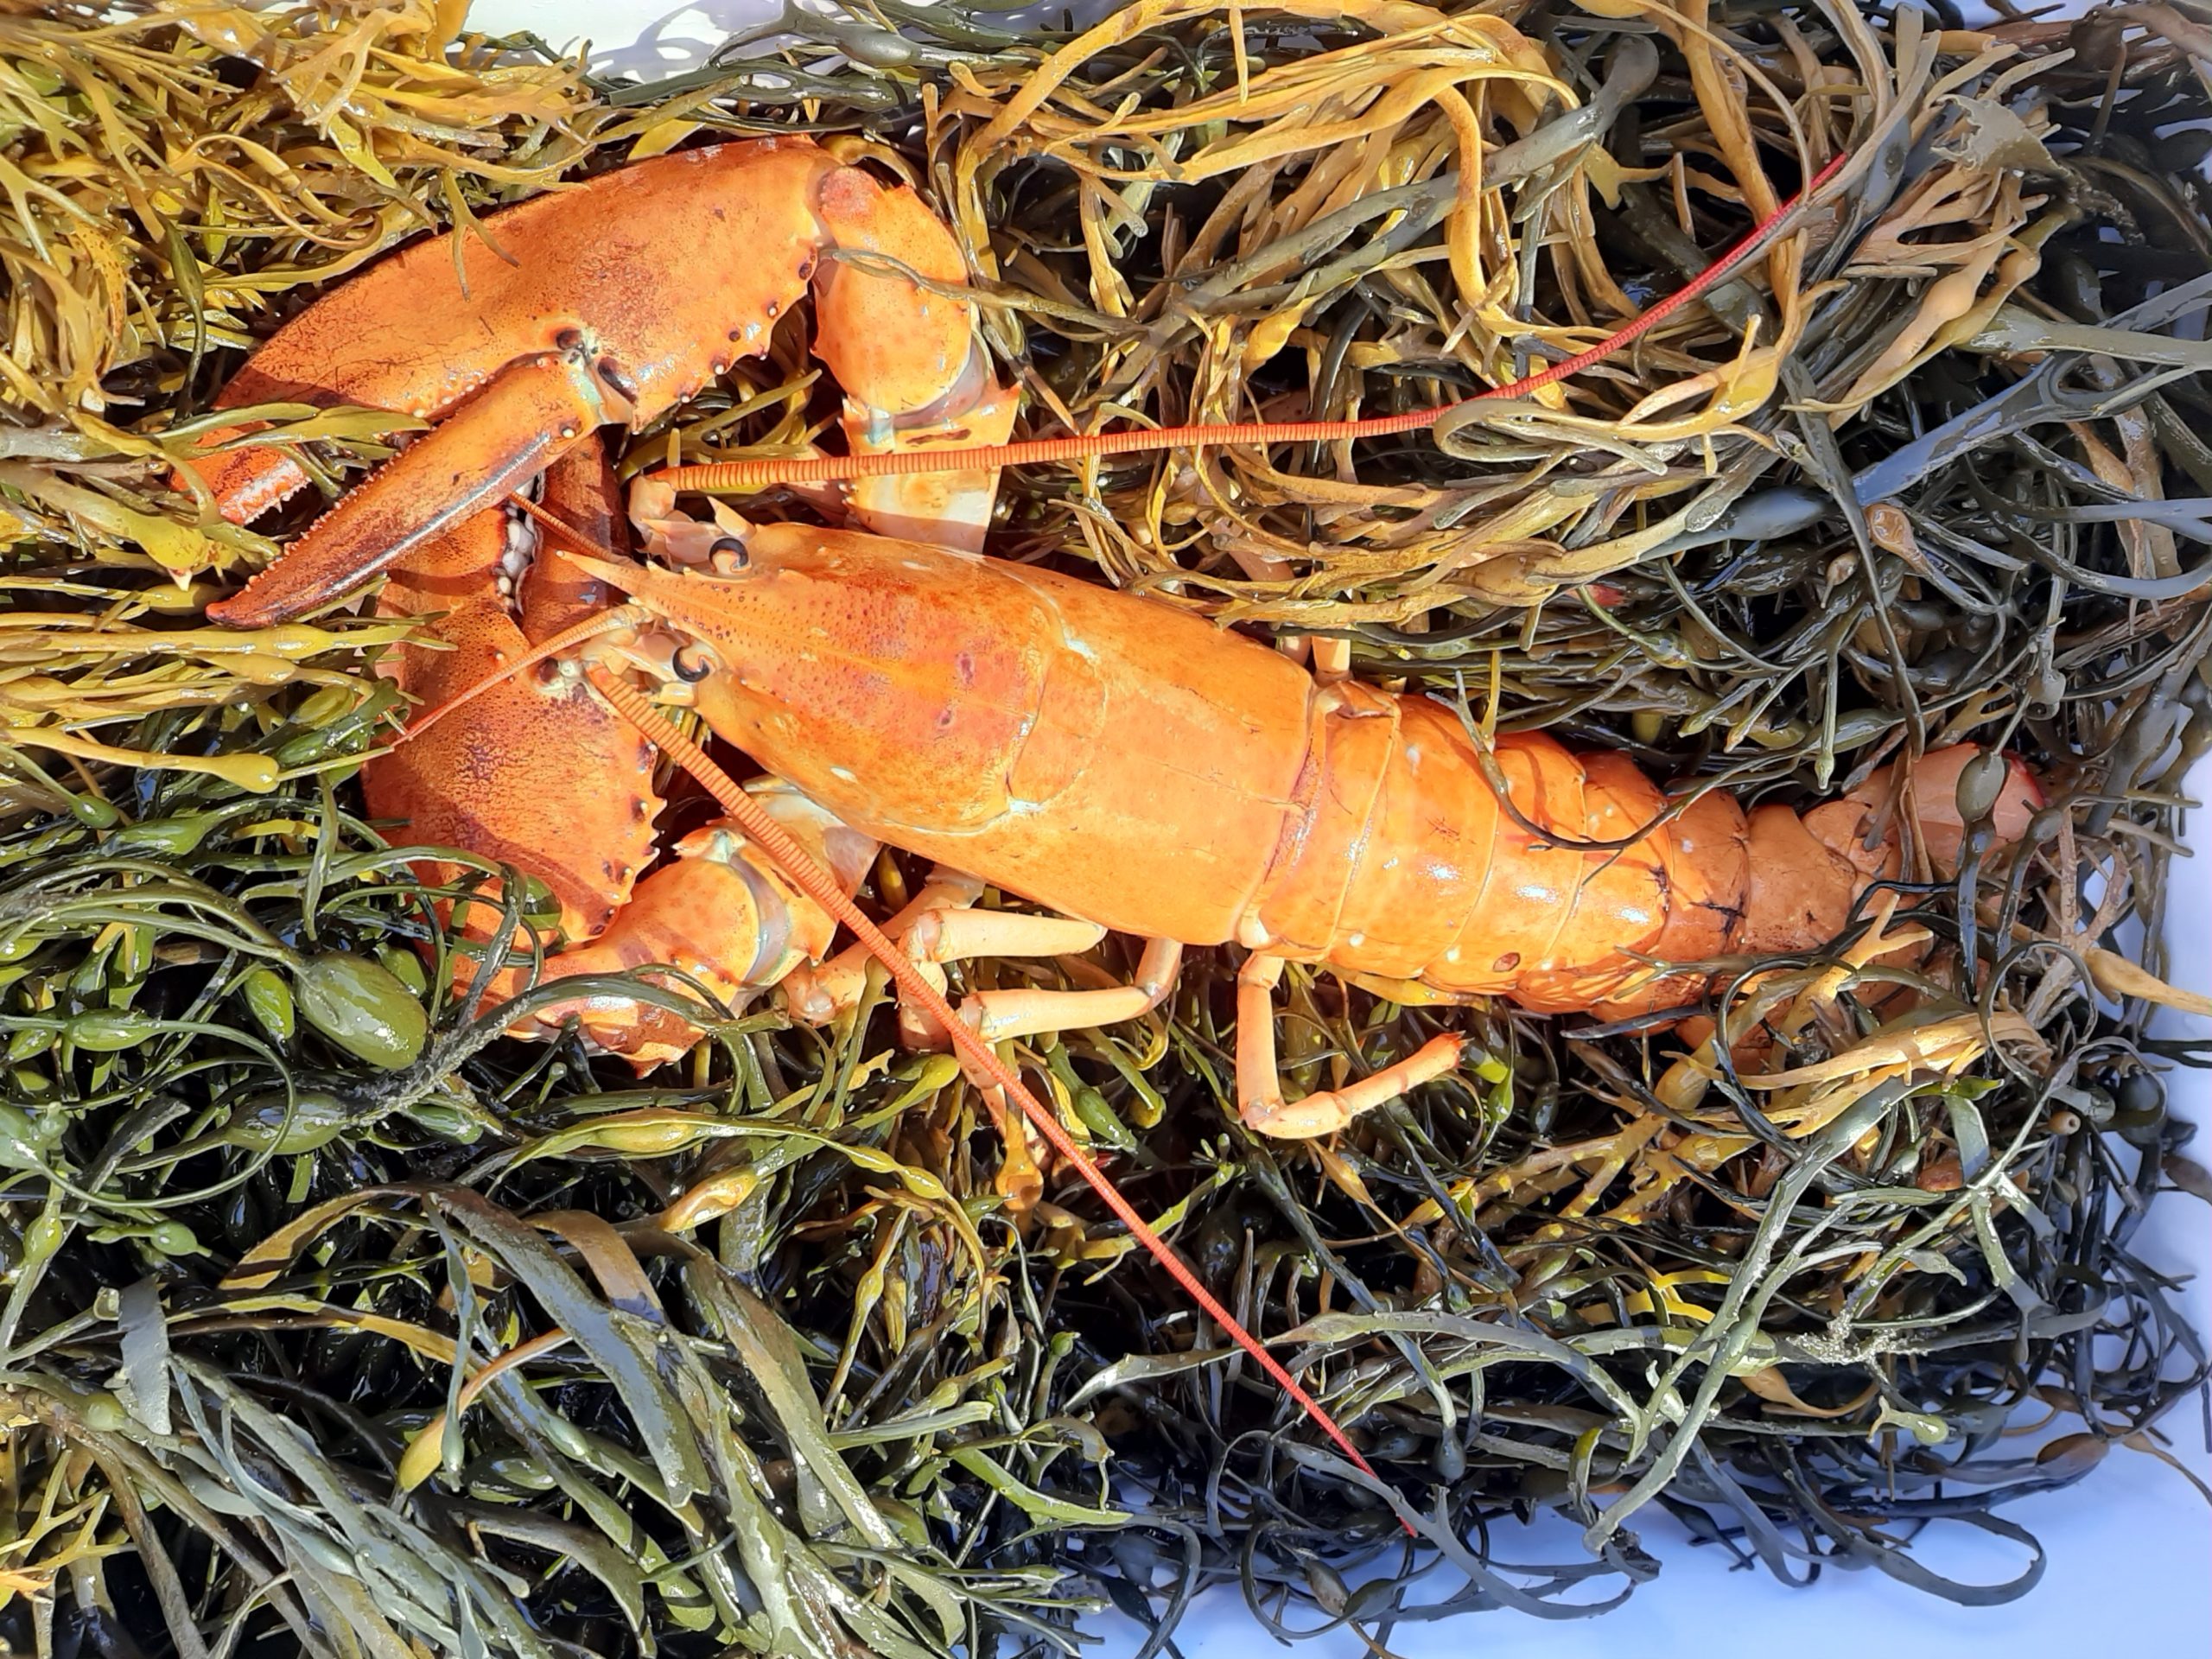 The lobster as it was transported to New York Aquarium, in a cooler on a bed of ice, seaweed and sea lettuce. DEBBIE TUMA